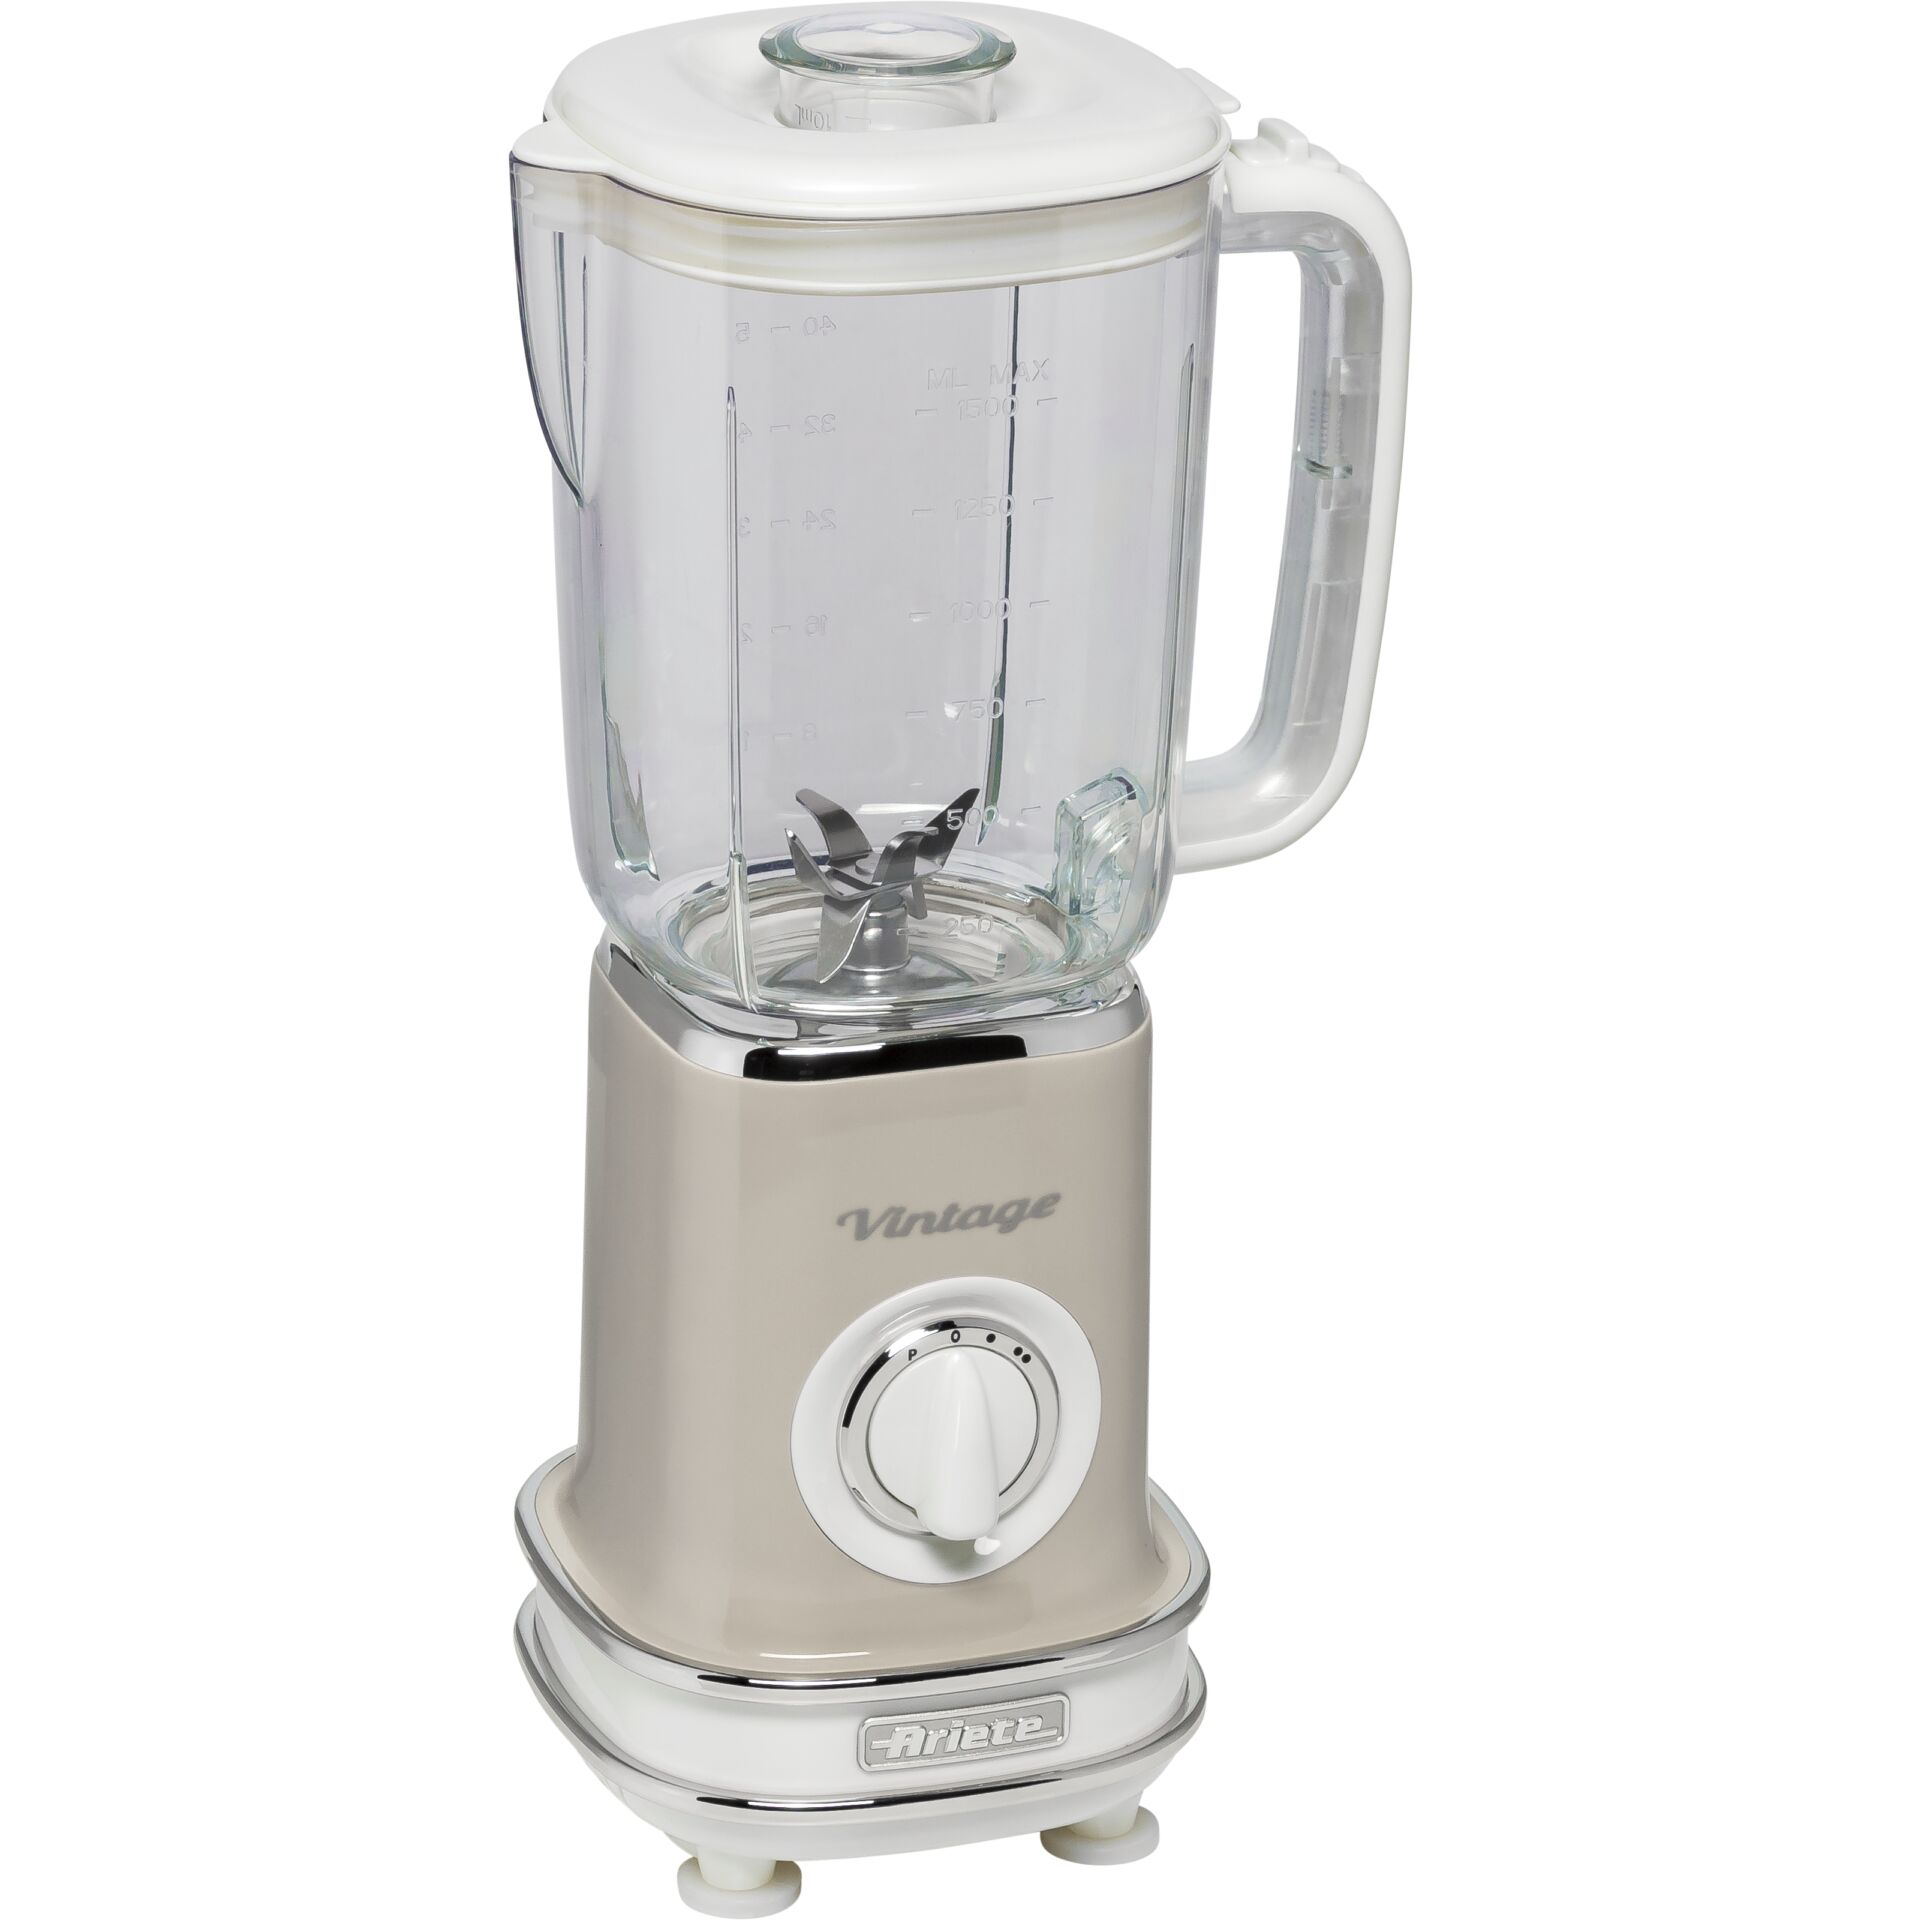 Ariete Vintage Blender With Glass Cup 1000W